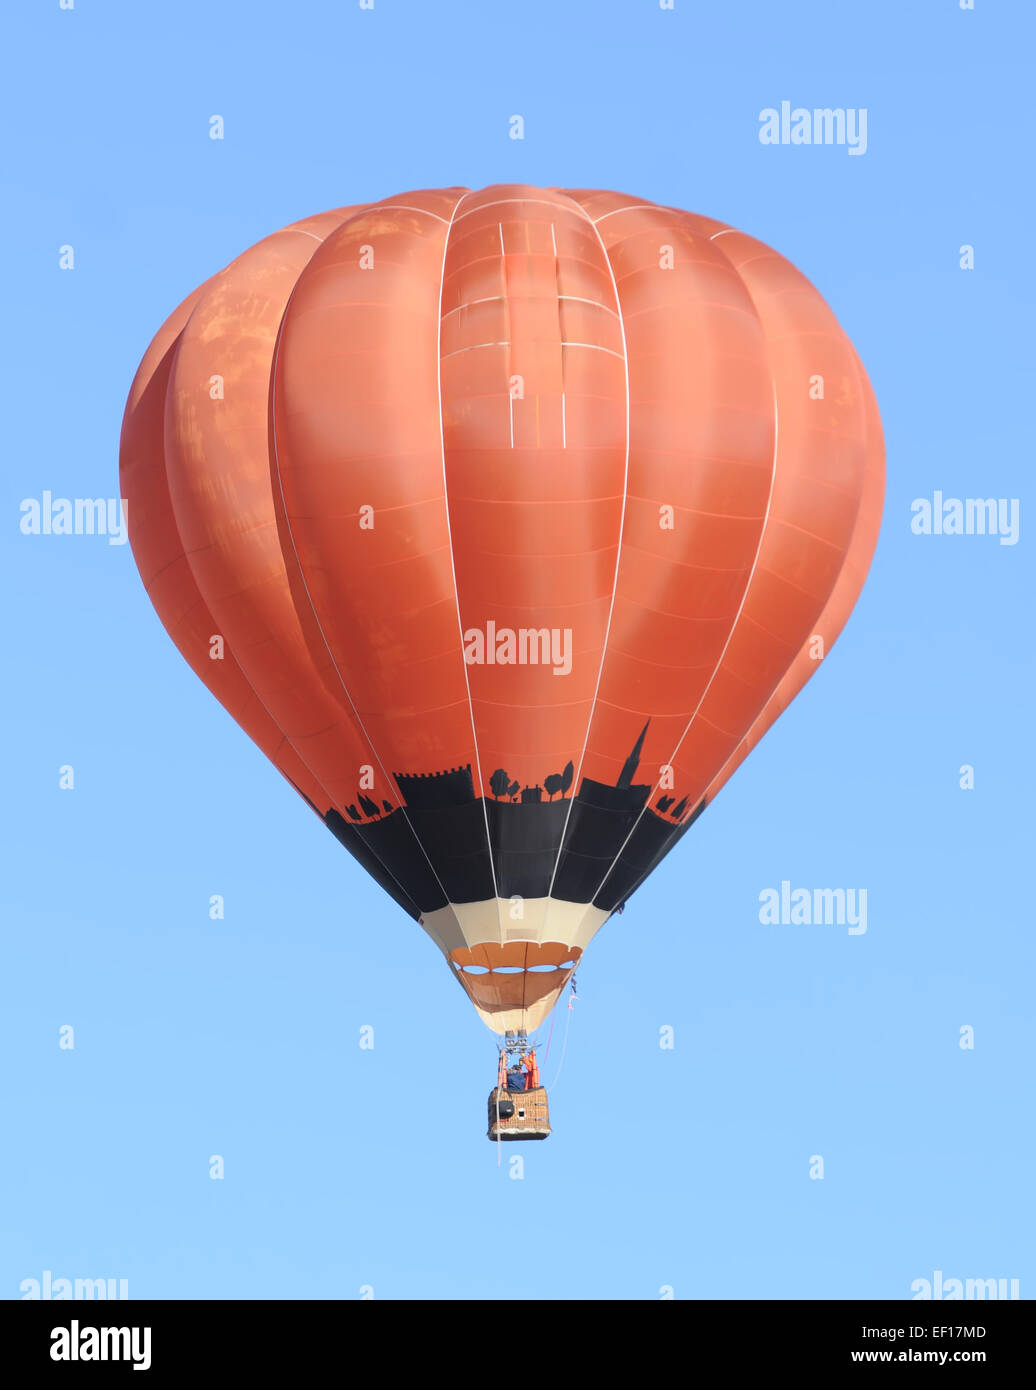 Bright red hot air balloon against blue sky Stock Photo